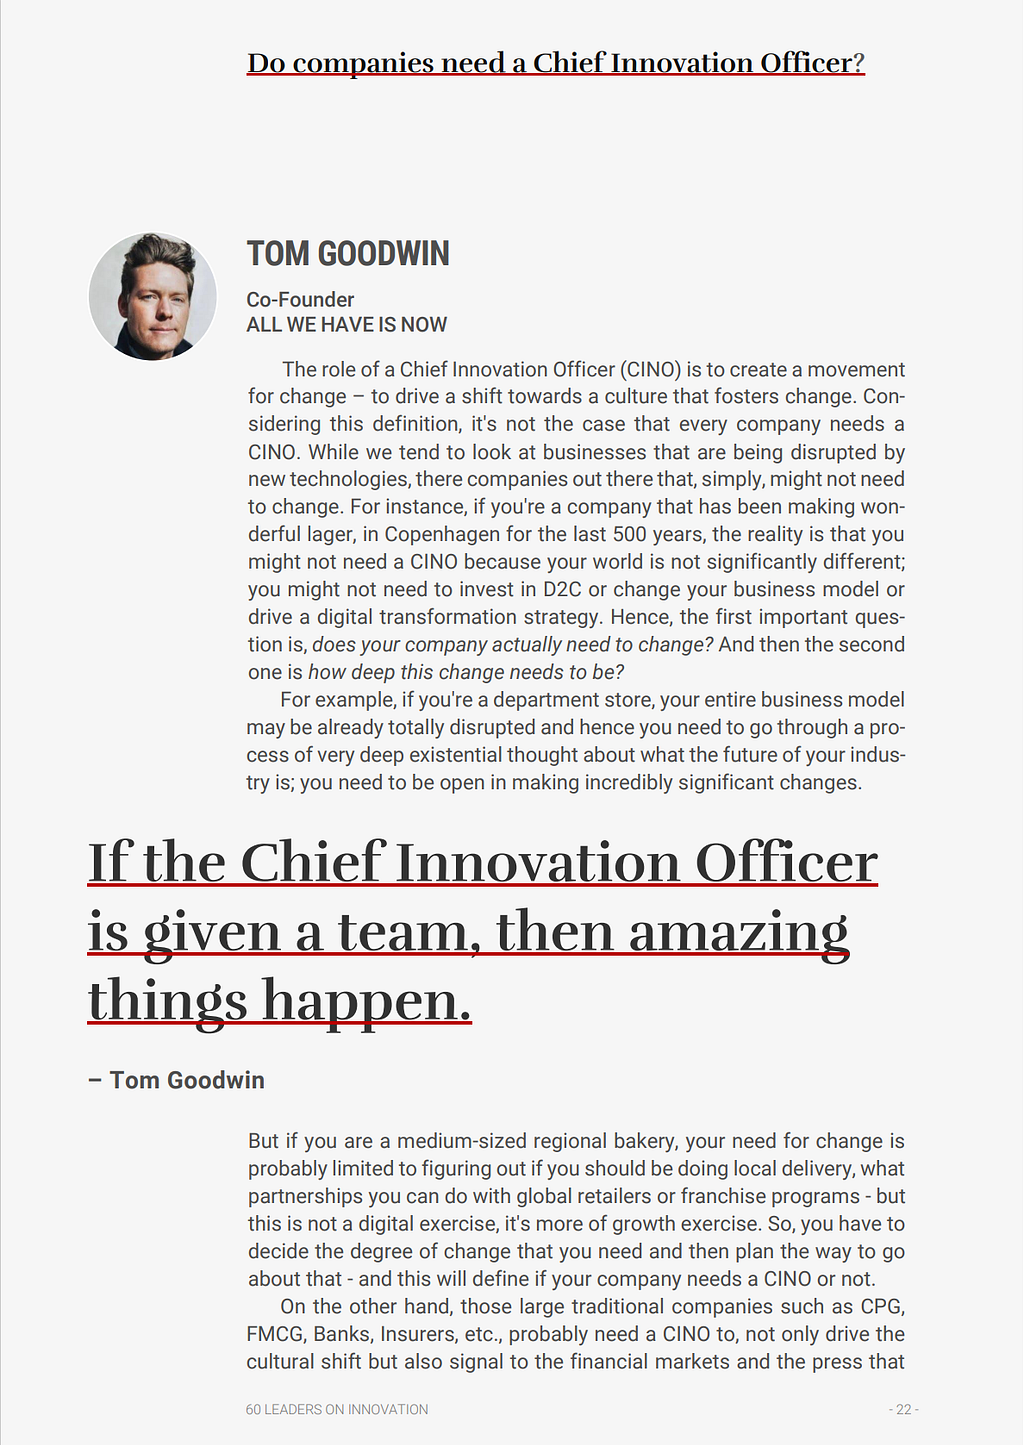 Do companies need a chief innovation officer? Tom Goodwin on 60 Leaders